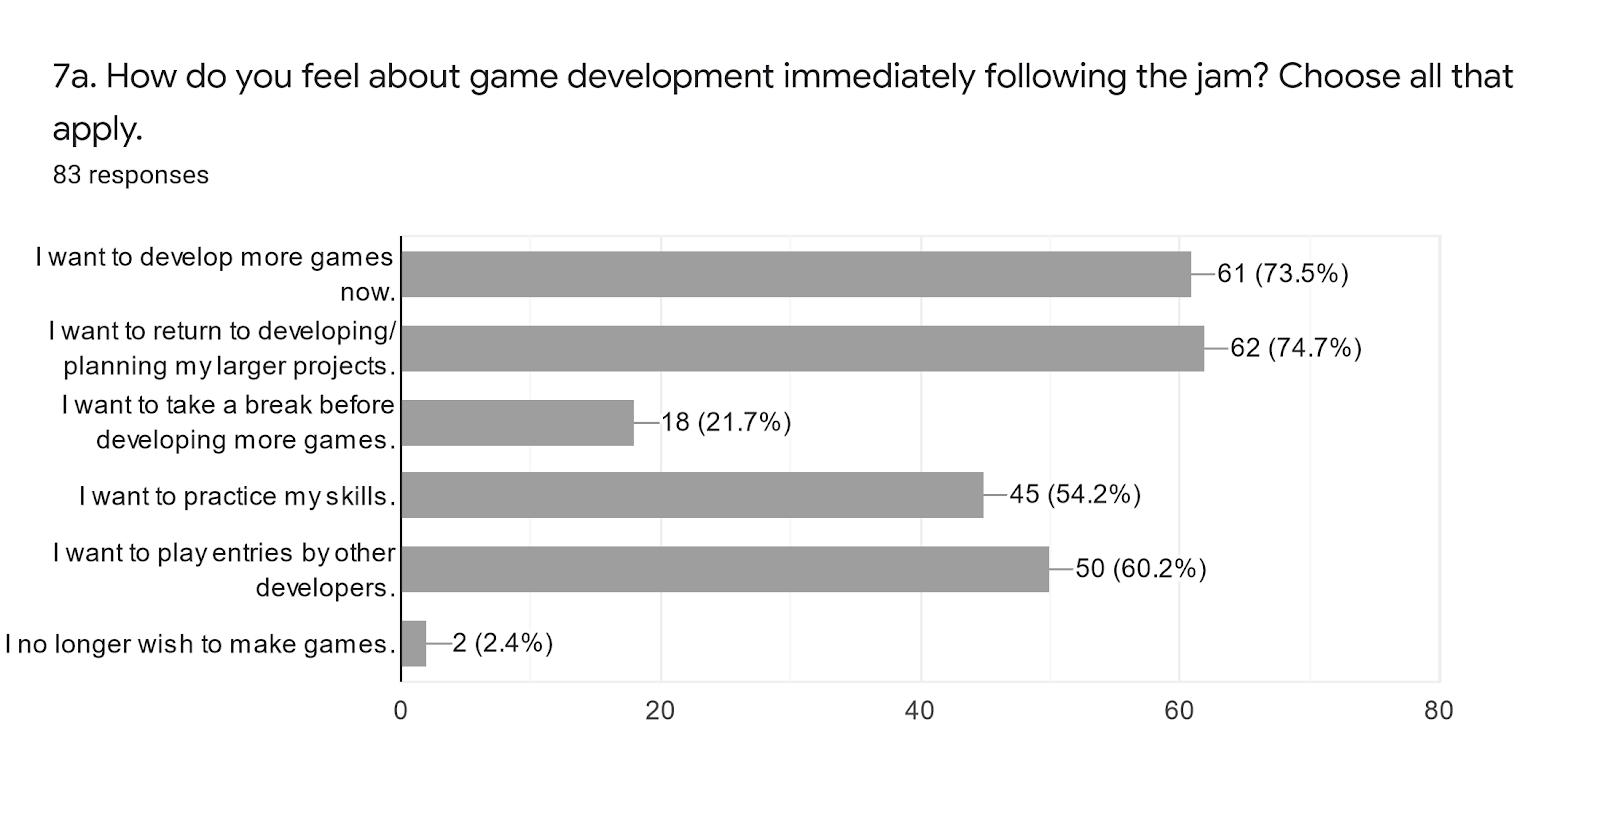 Forms response chart. Question title: 7a. How do you feel about game development immediately following the jam? Choose all that apply.. Number of responses: 83 responses.